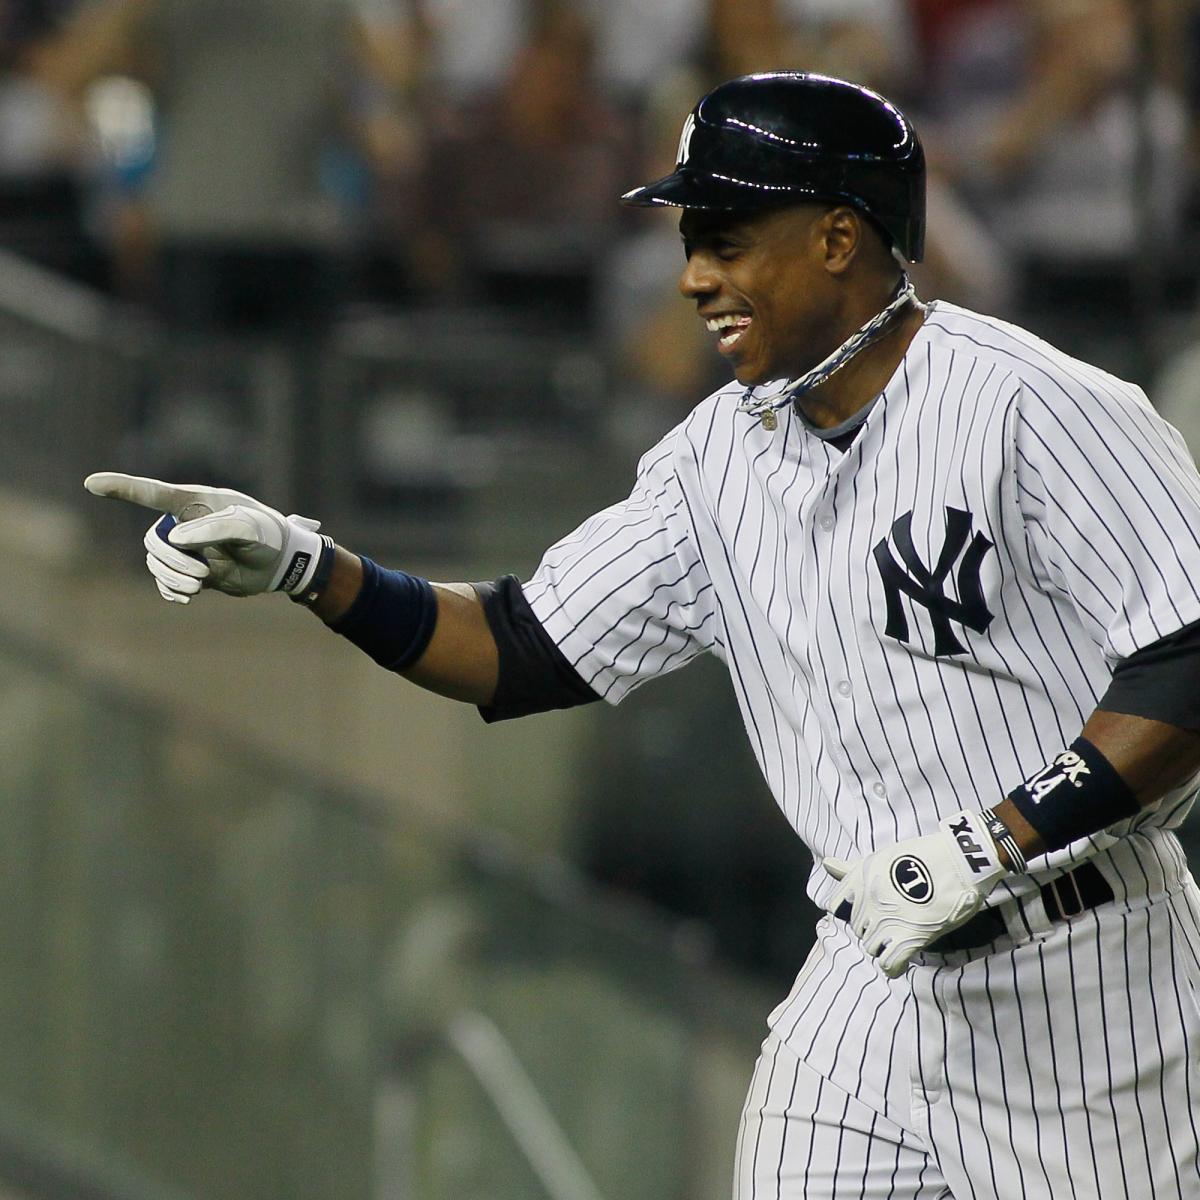 Bradley: Yankees' Curtis Granderson is dialed in at the plate like